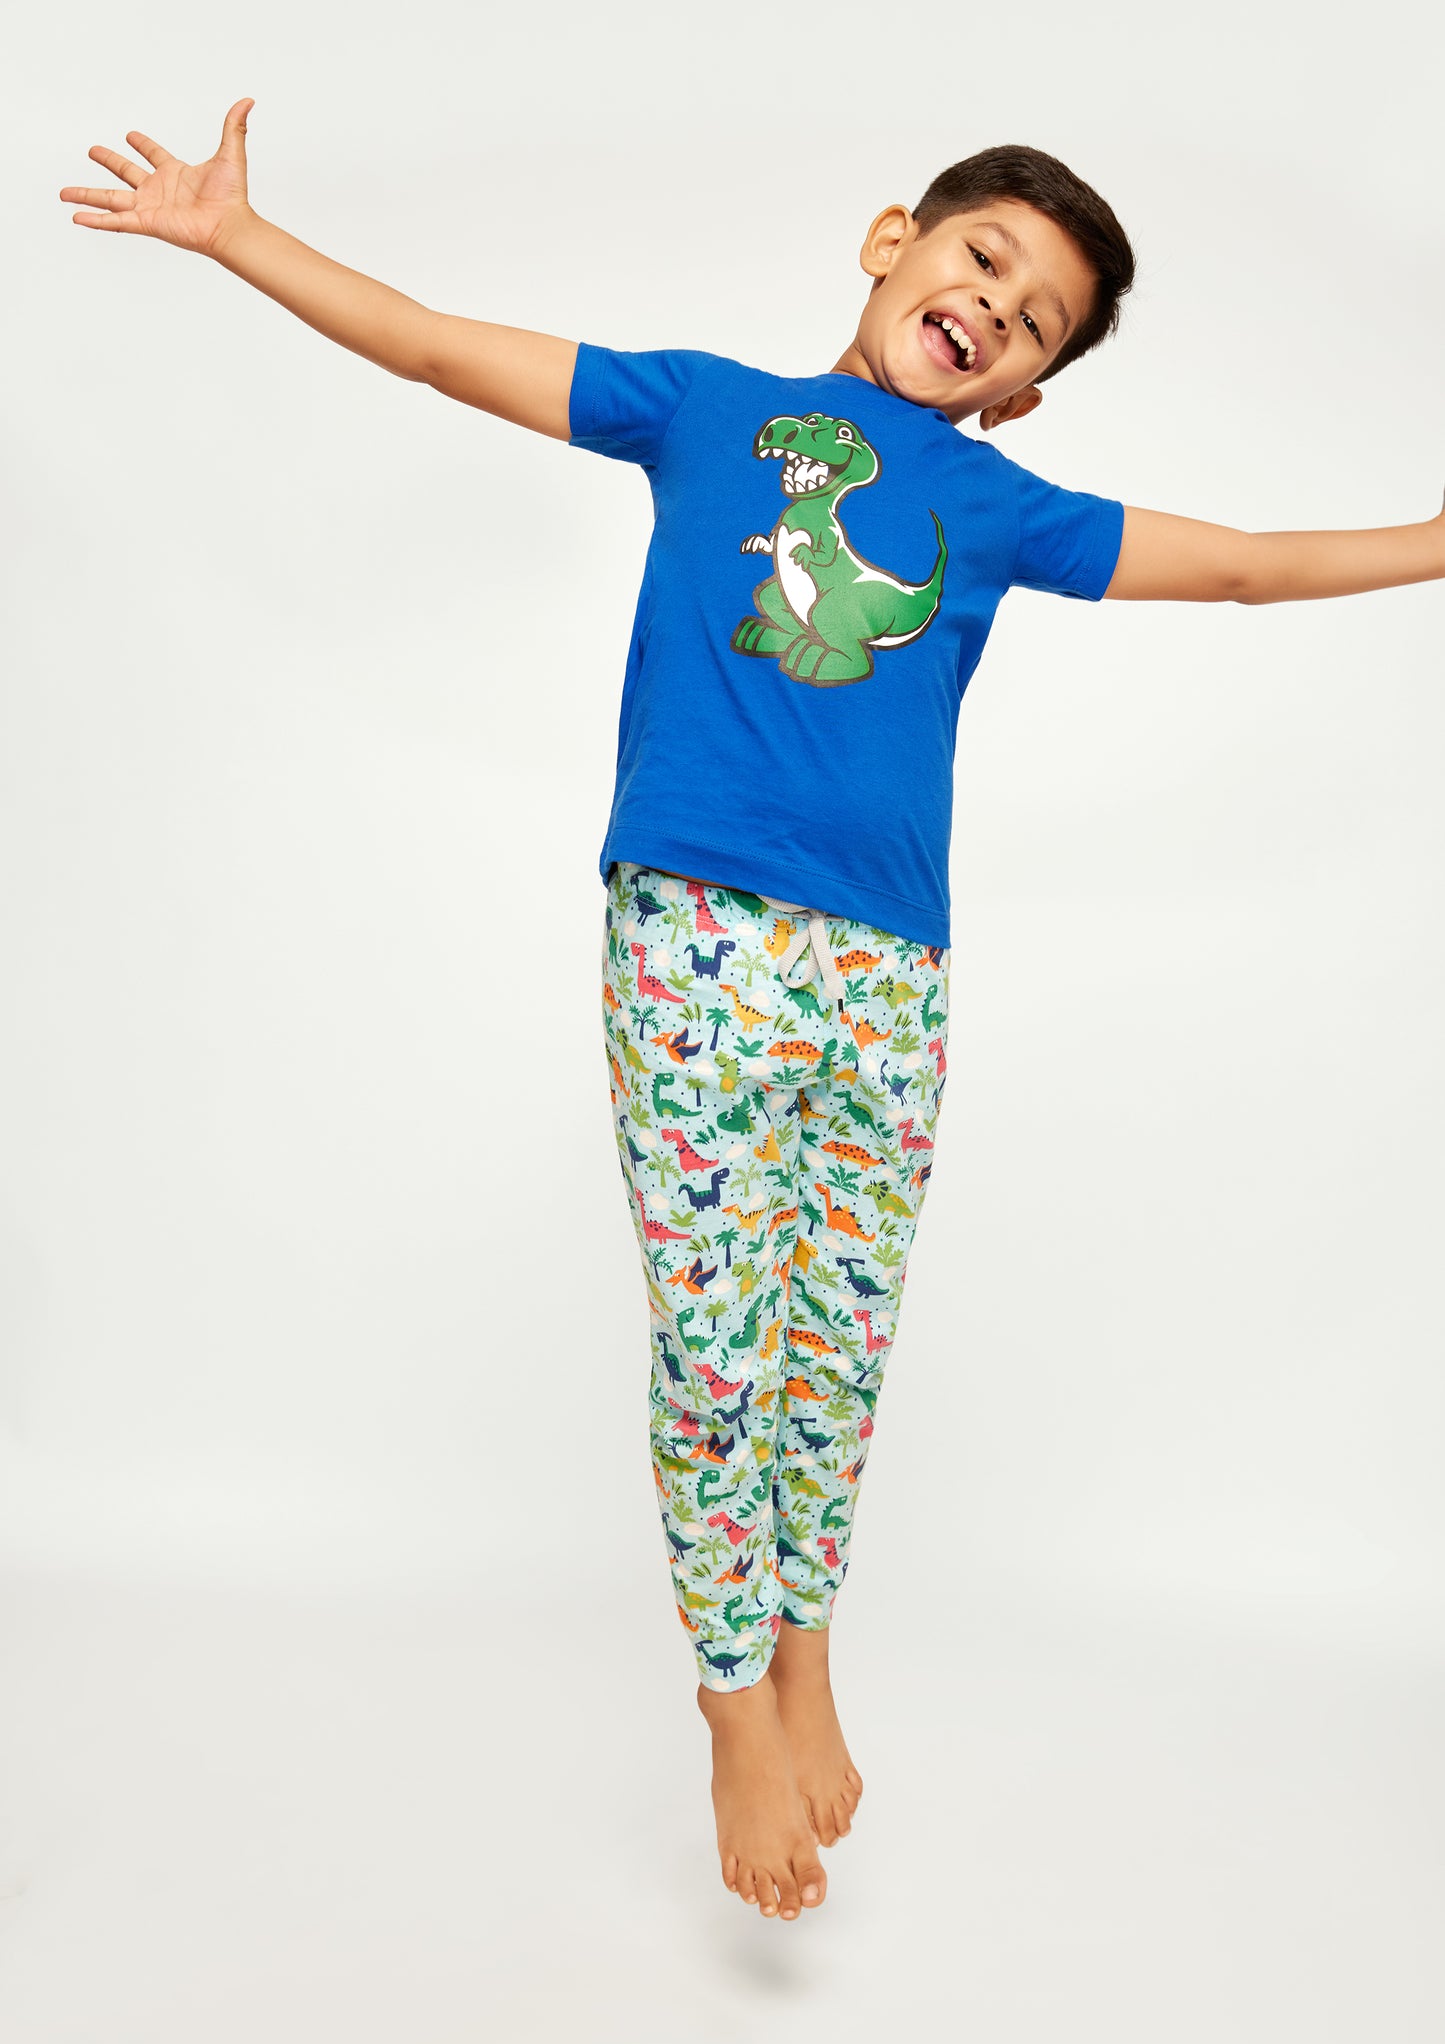 RED, BLUE AND GREEN DINOSAUR PRINT Short sleeve tee plus pant in knit